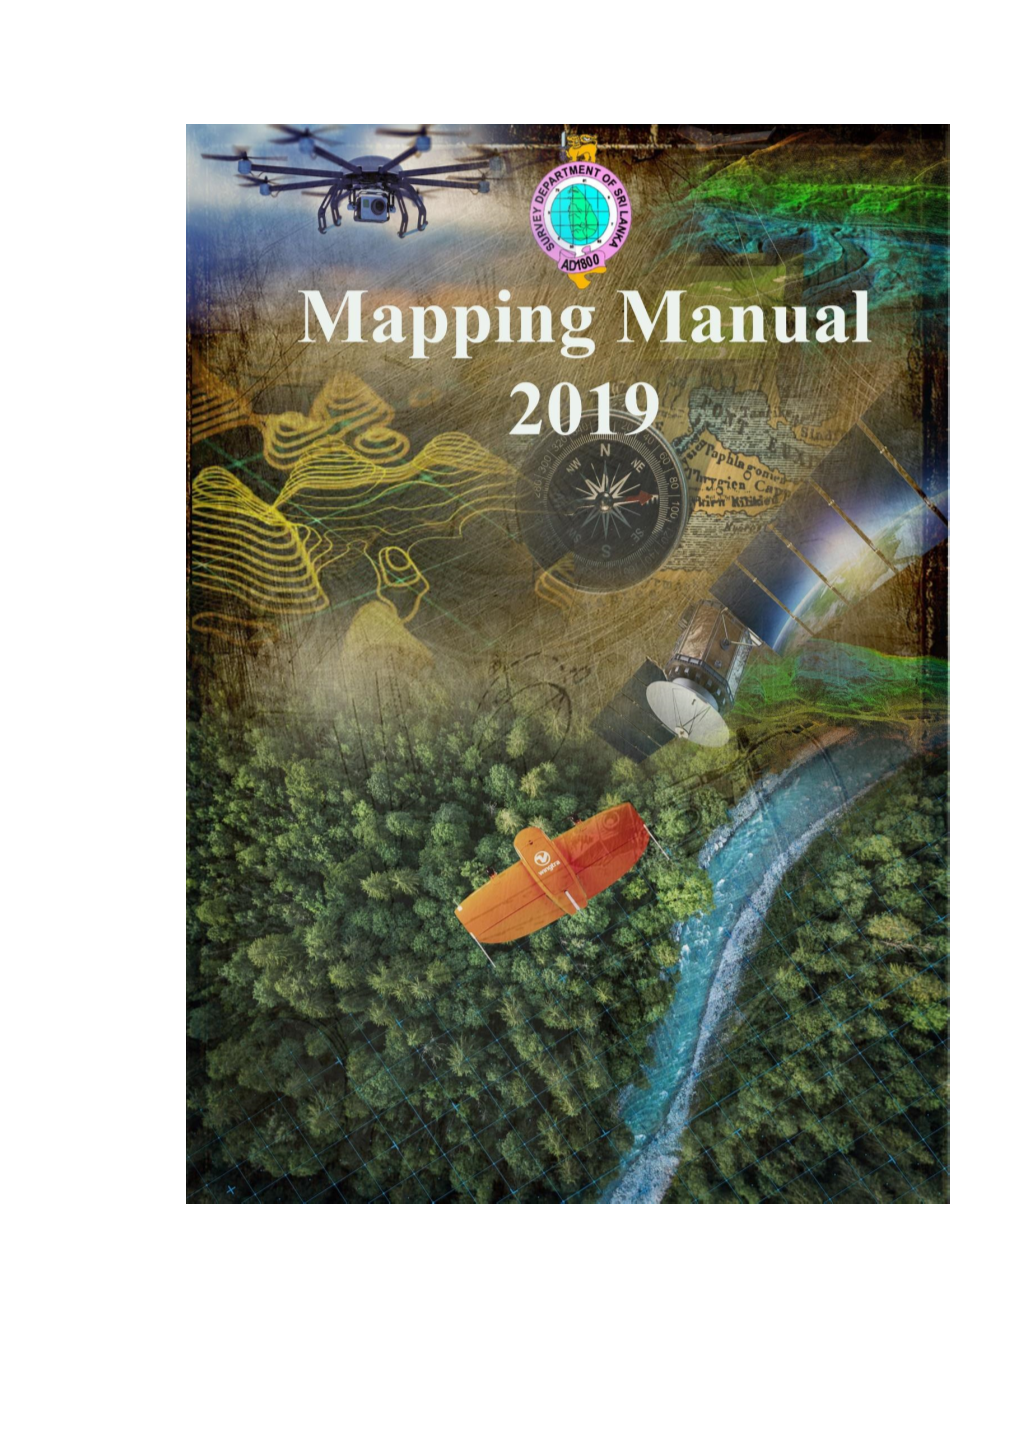 Mapping Manual 2019